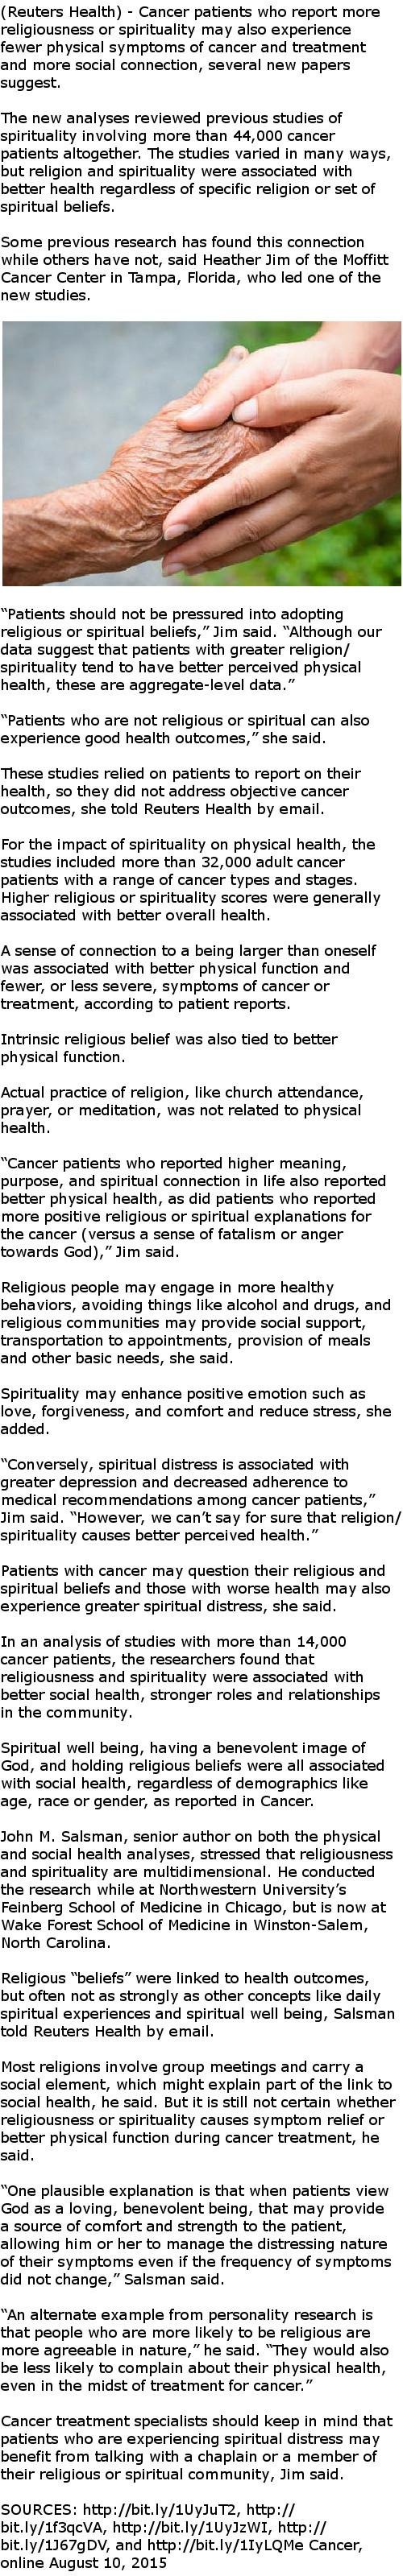 Spirituality may be tied to easier cancer course